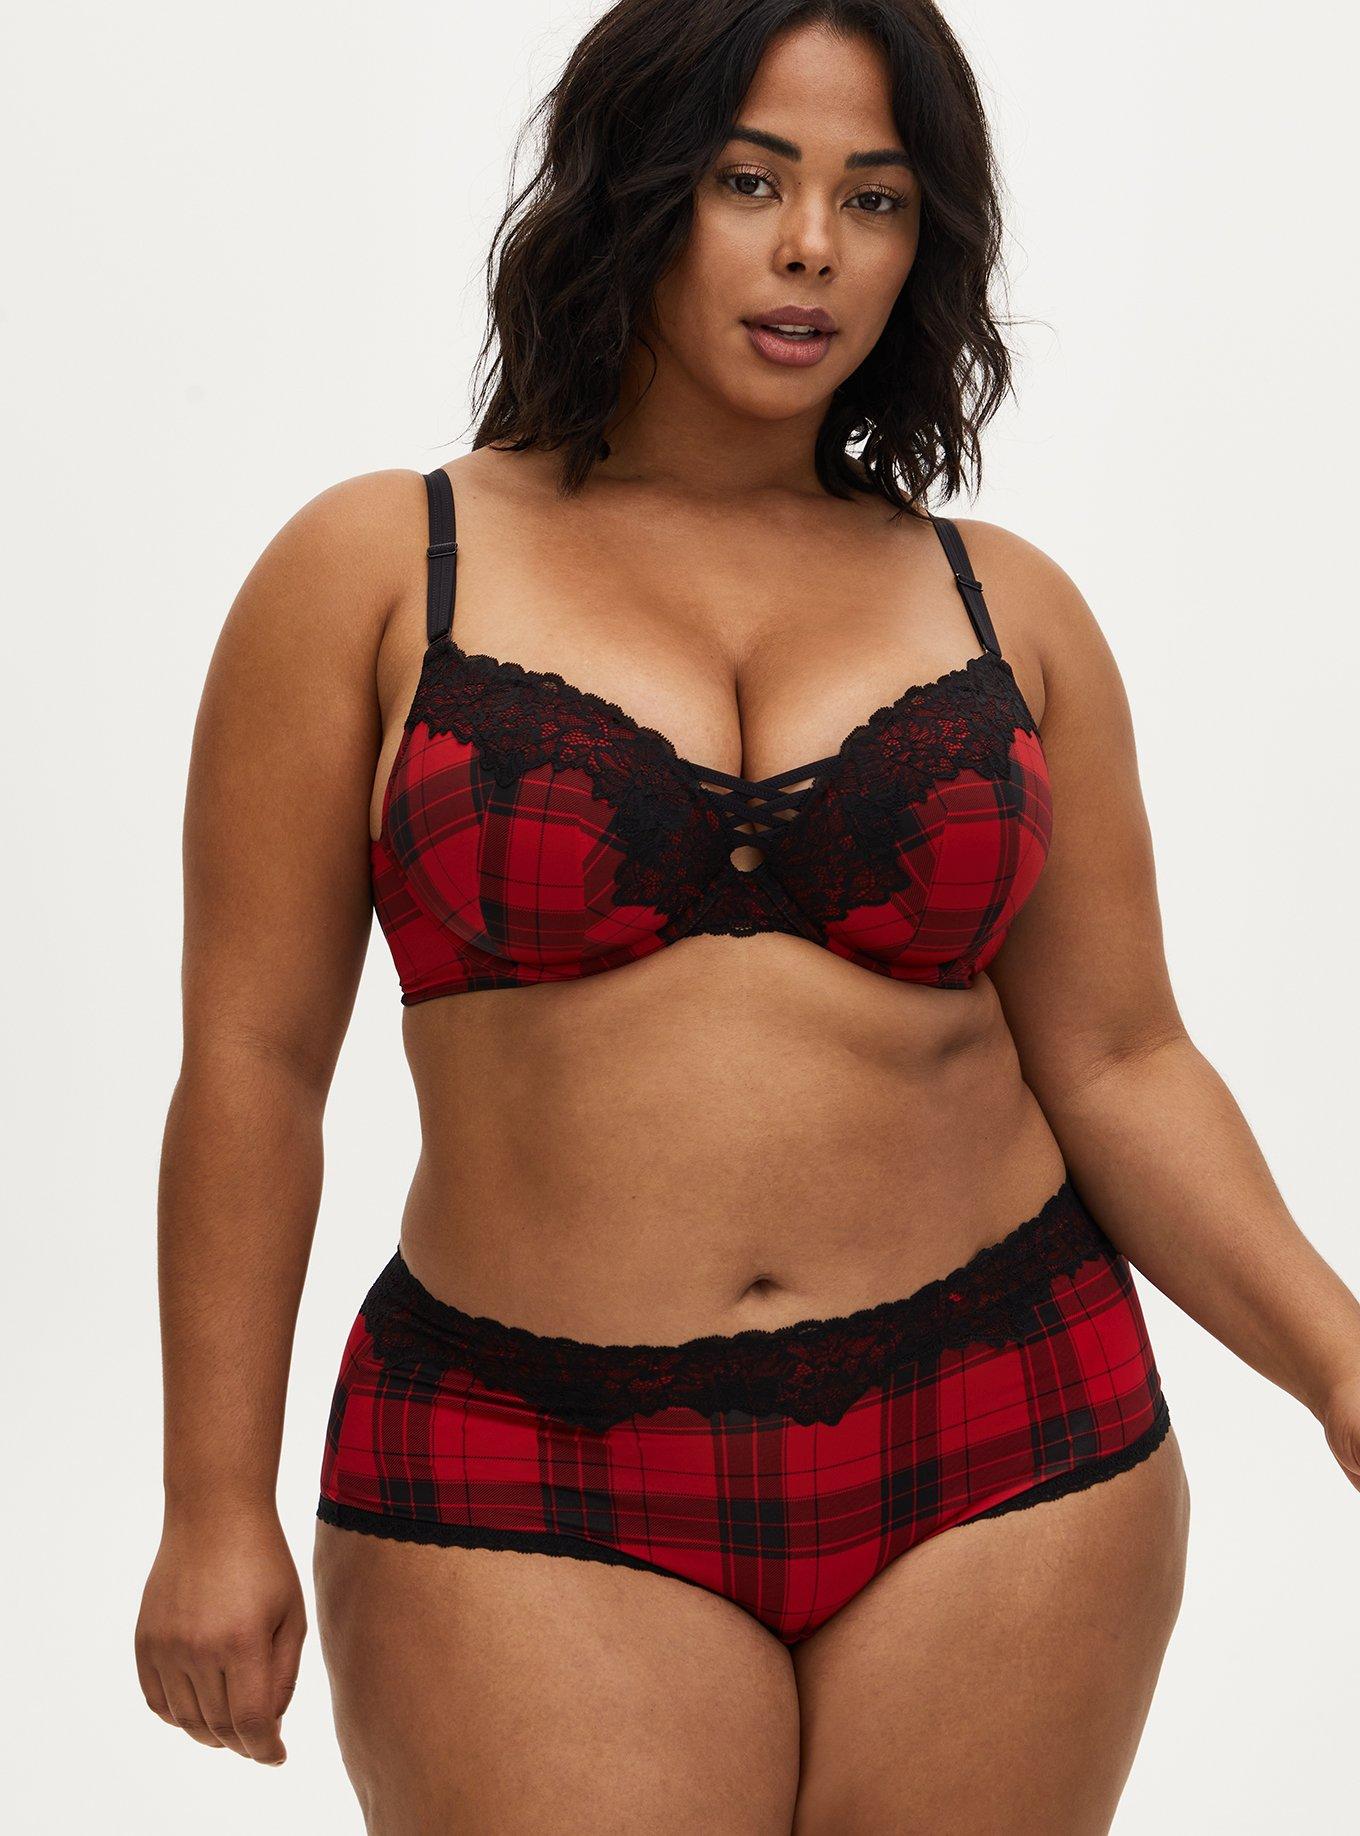 Torrid red black lace adjustable strap push-up bra women's size 42C - $22 -  From Spencer